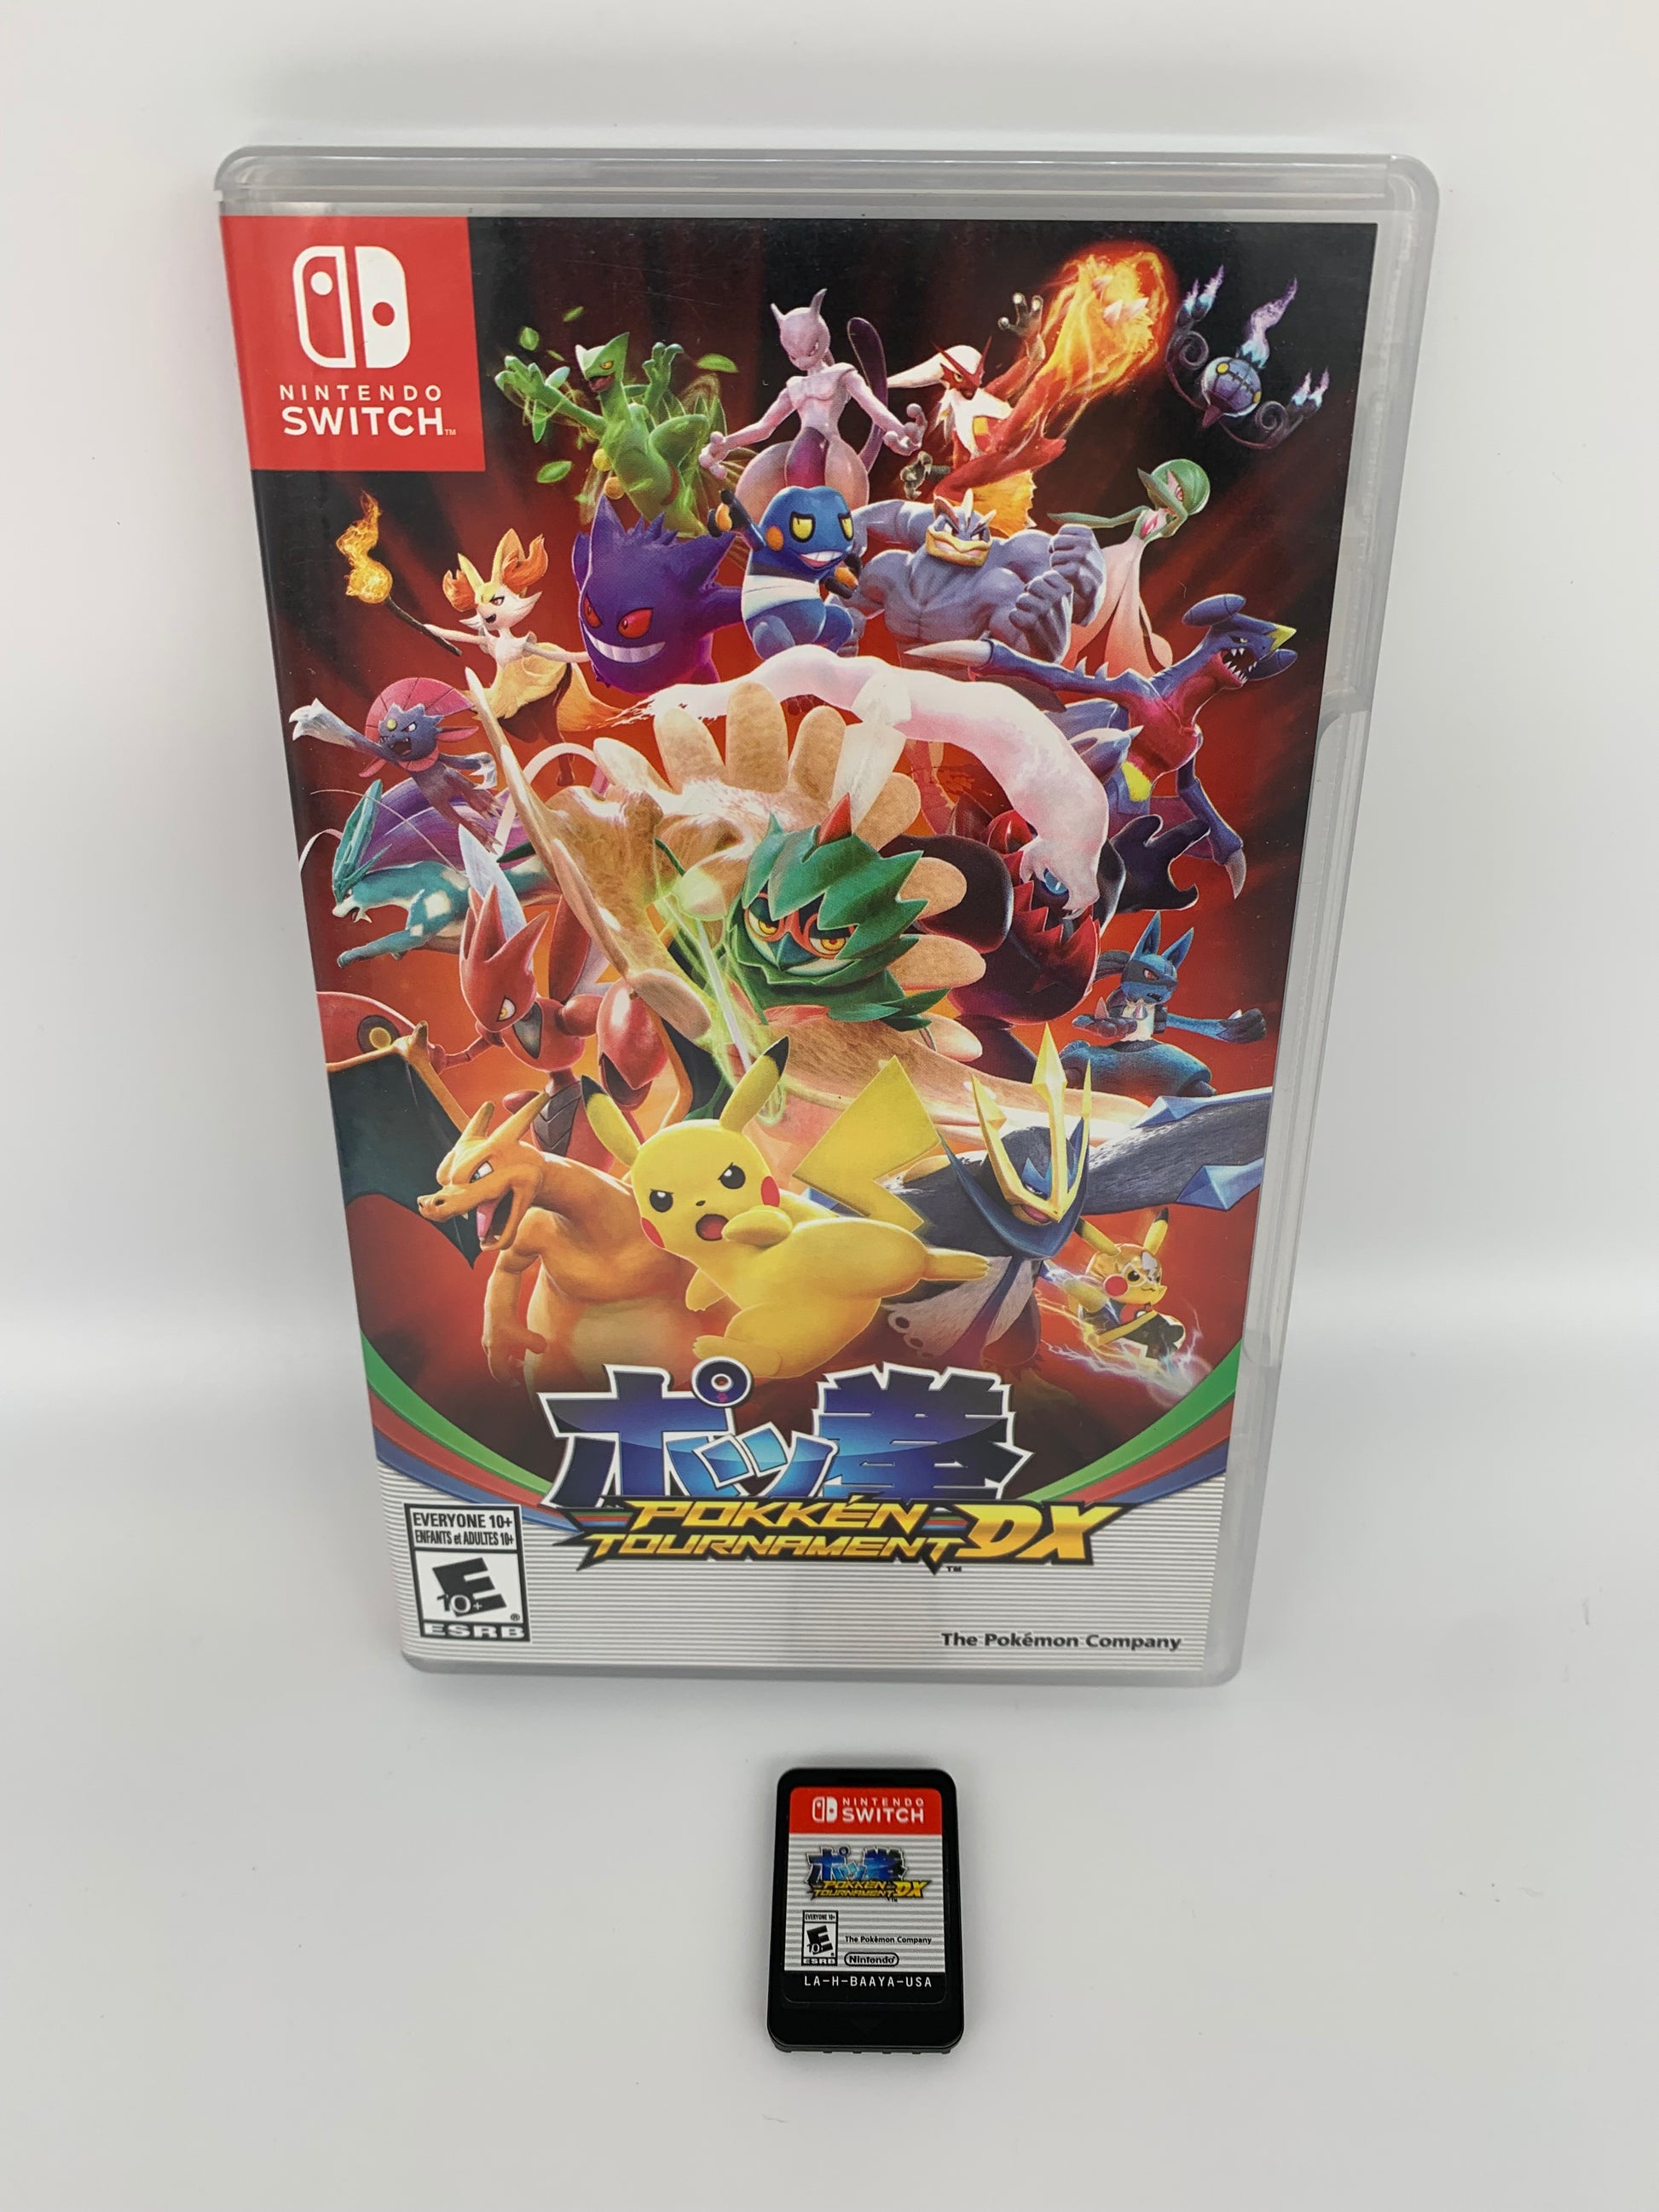 PiXEL-RETRO.COM : NINTENDO SWITCH NEW SEALED IN BOX COMPLETE MANUAL GAME NTSC POKKEN TOURNAMENT DX